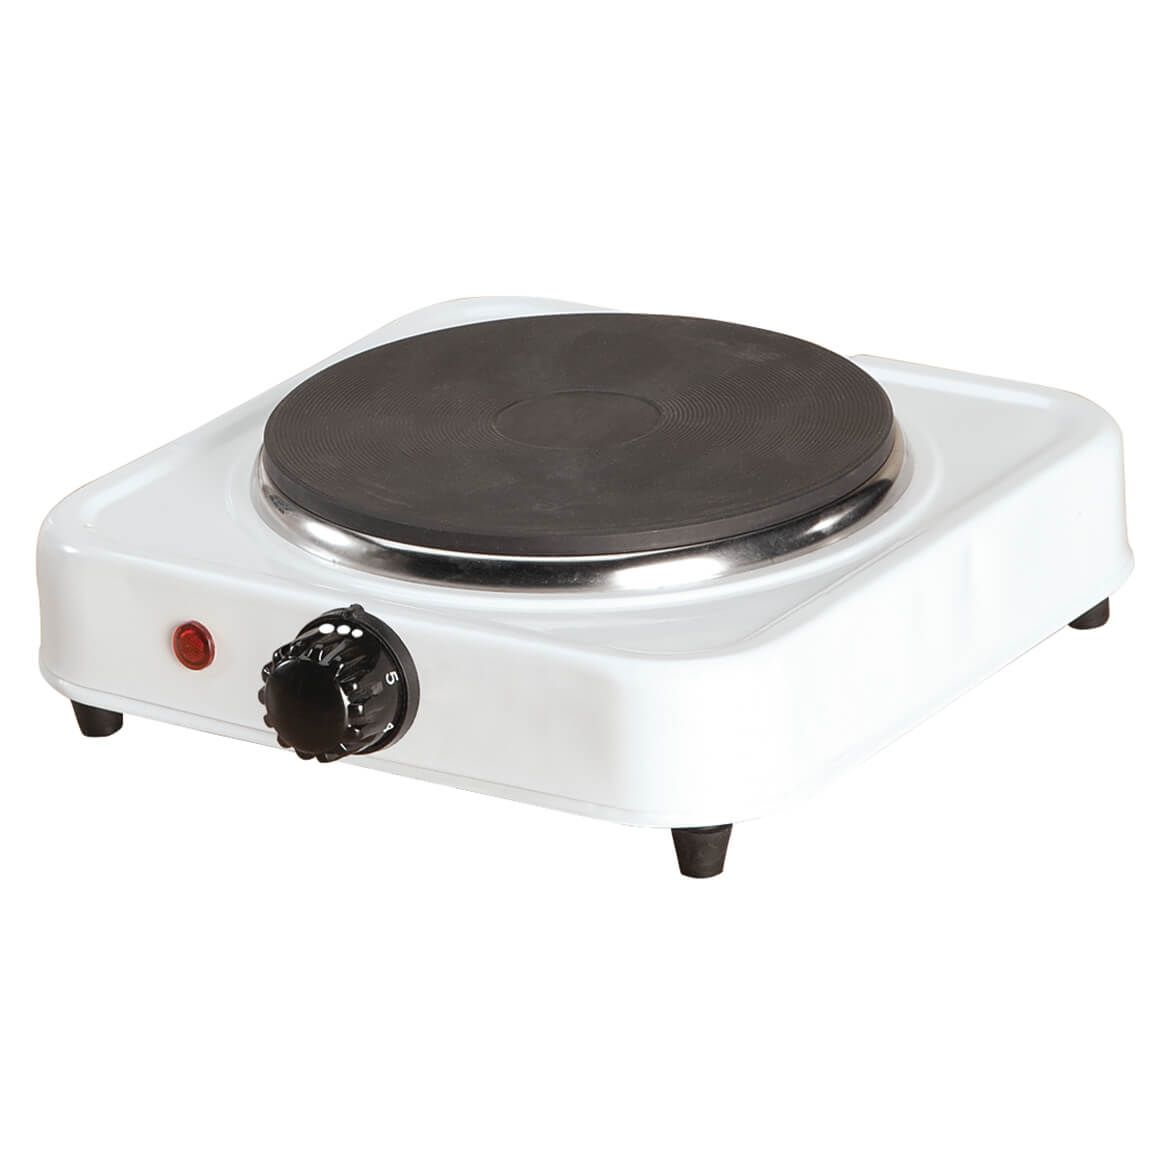 White Solid Single Top Hot Plate by Home Style Kitchen + '-' + 356738